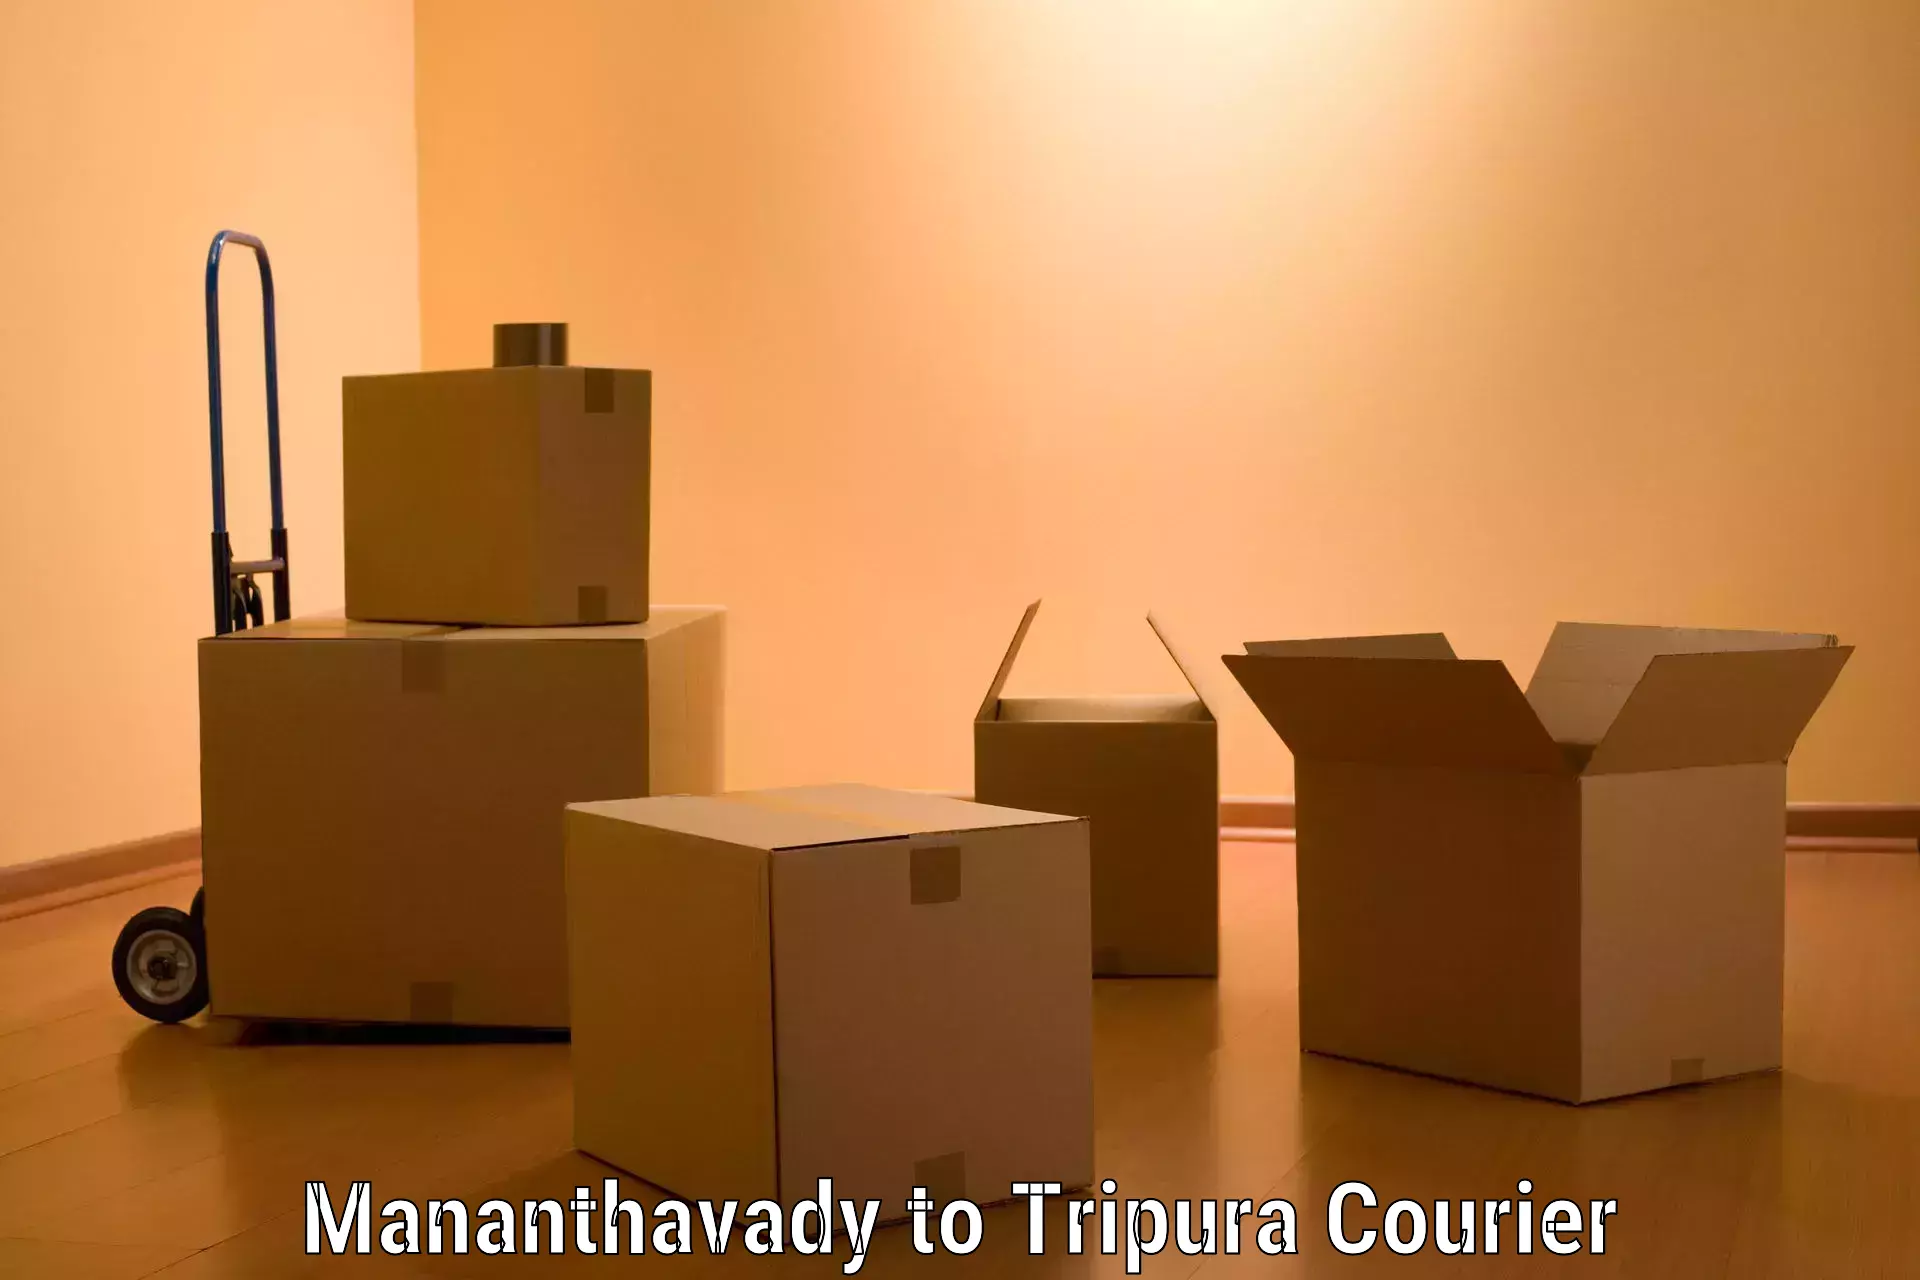 Trusted relocation experts Mananthavady to Udaipur Tripura